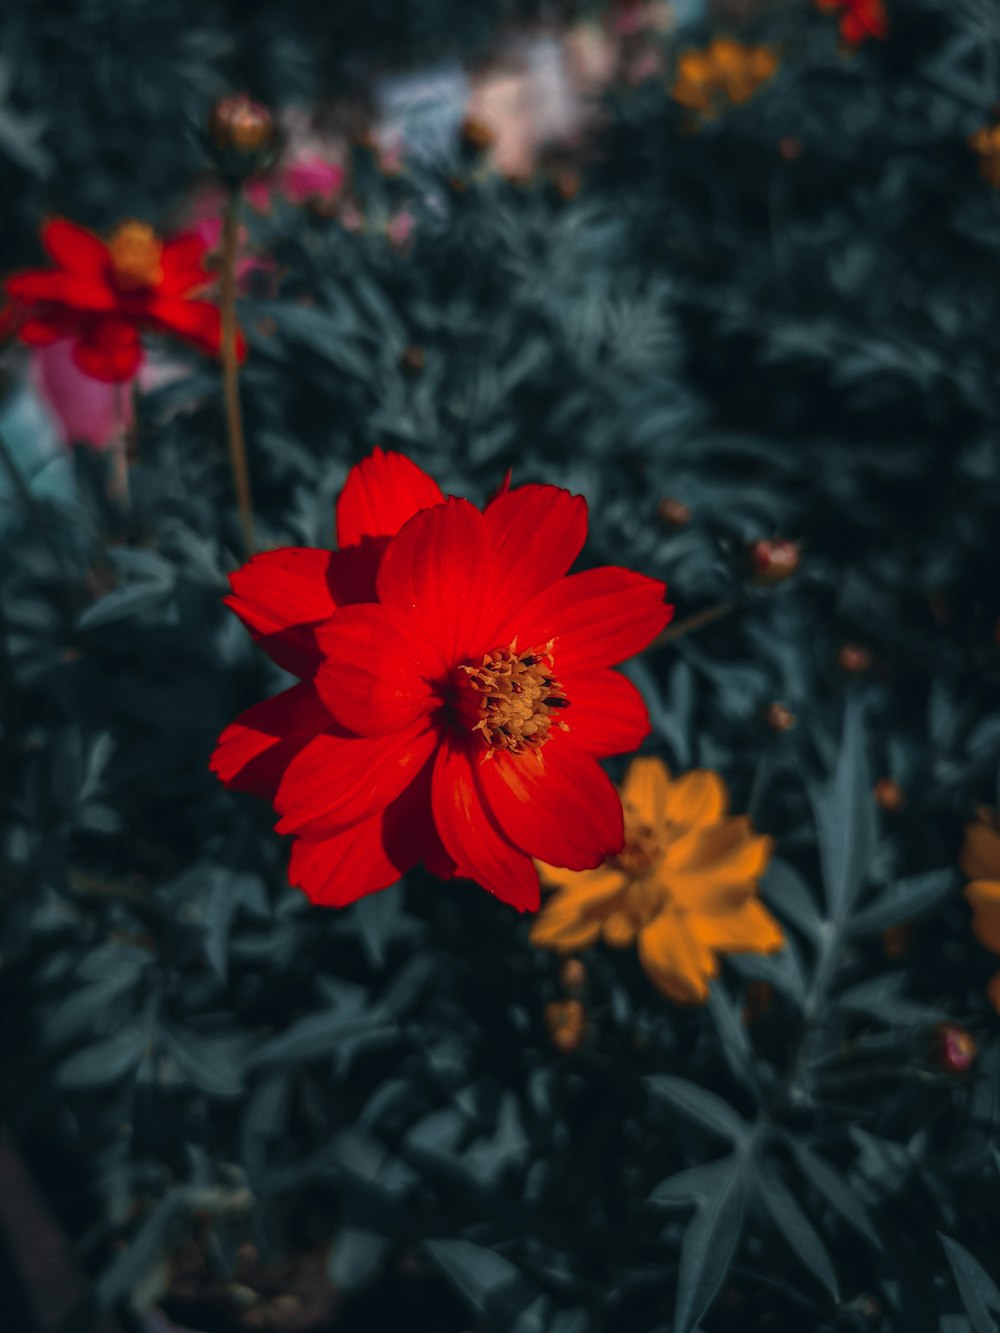 a close up of a red flower with other flowers in the background